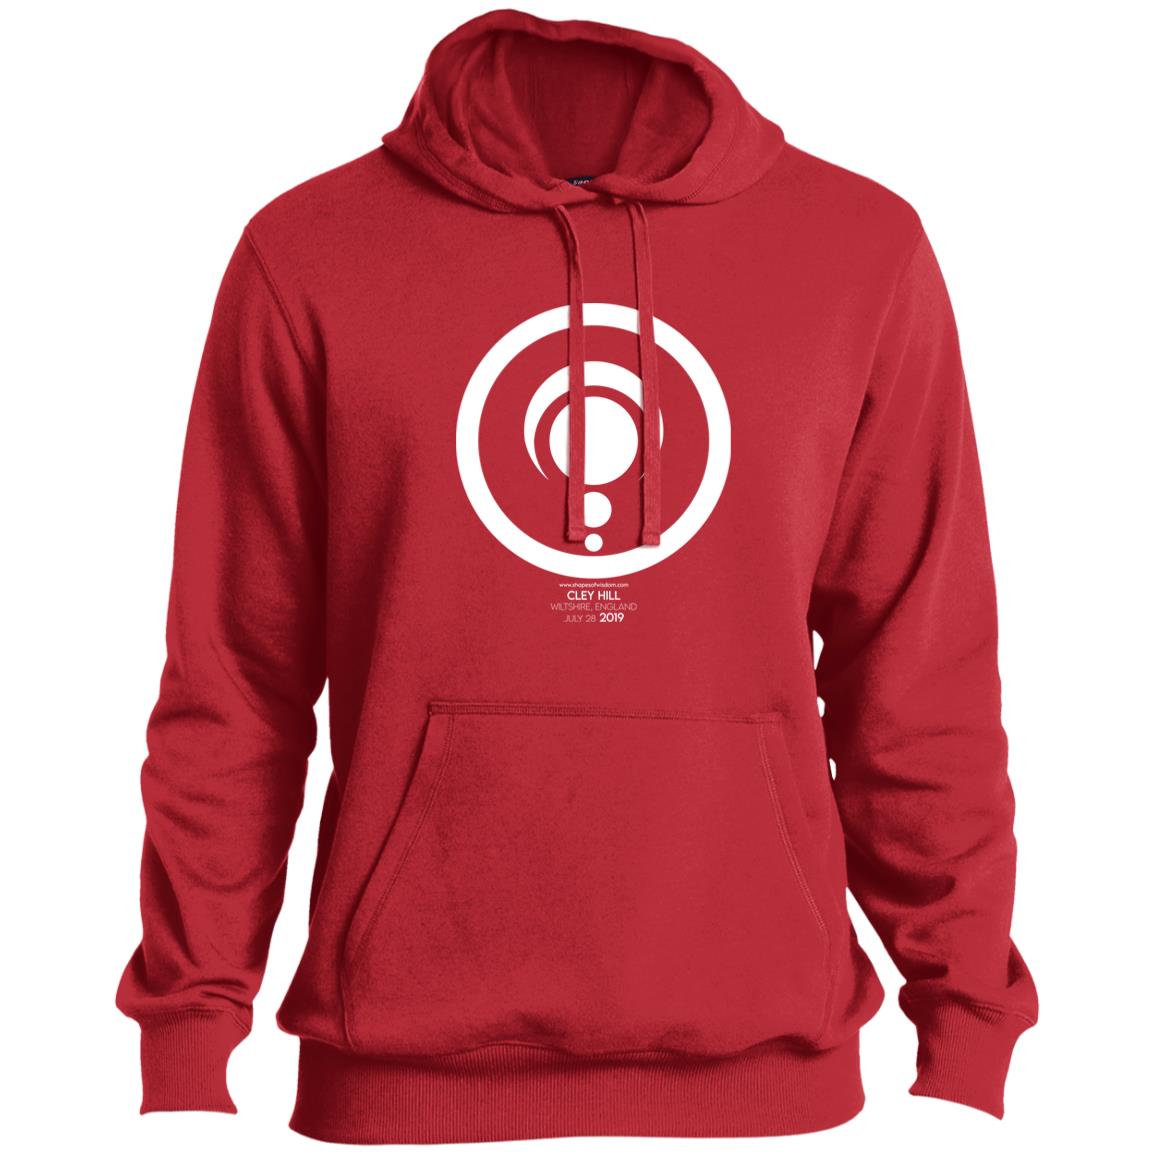 Crop Circle Pullover Hoodie - Cley Hill 3